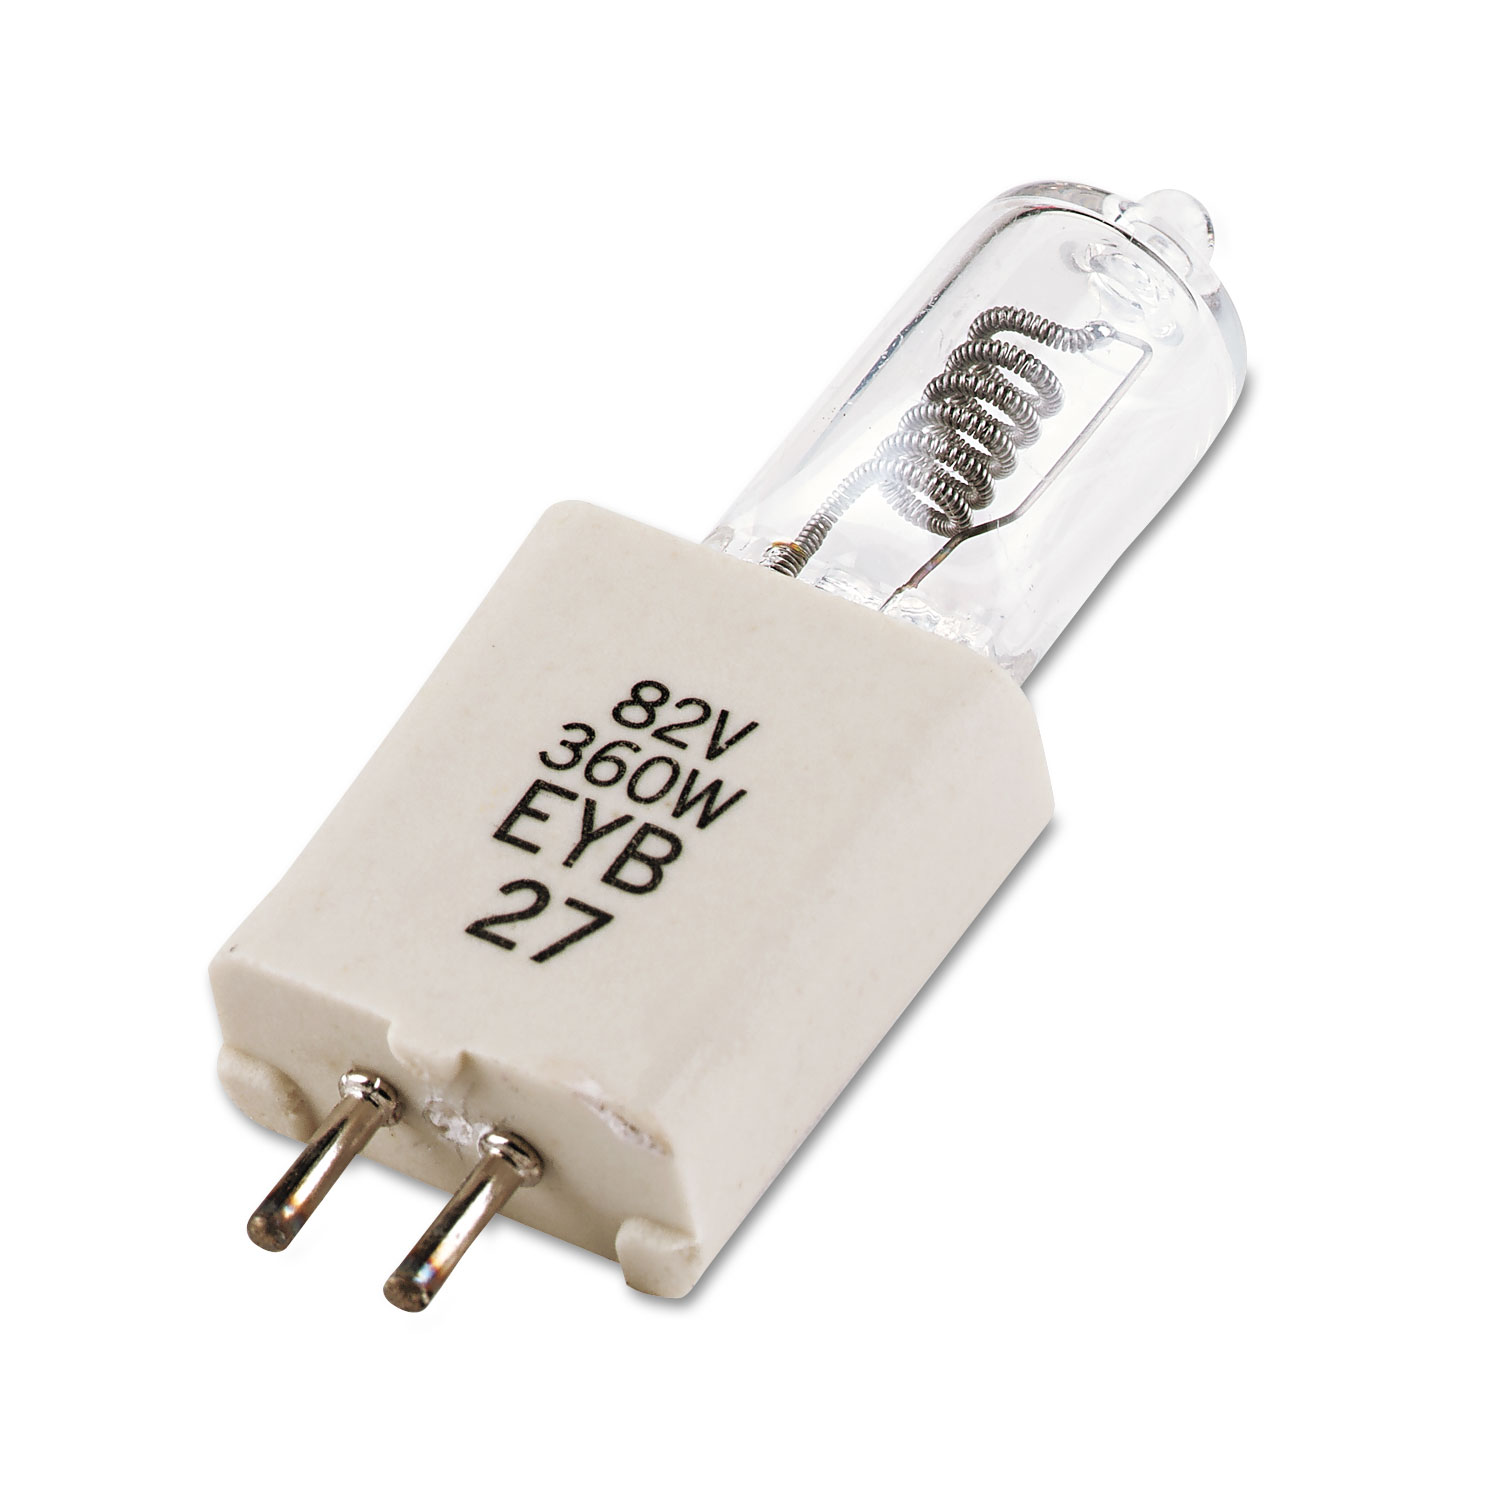 Replacement Bulb for Bell & Howell/Eiki/Apollo/Da-lite/Buhl/Dukane Products, 82V